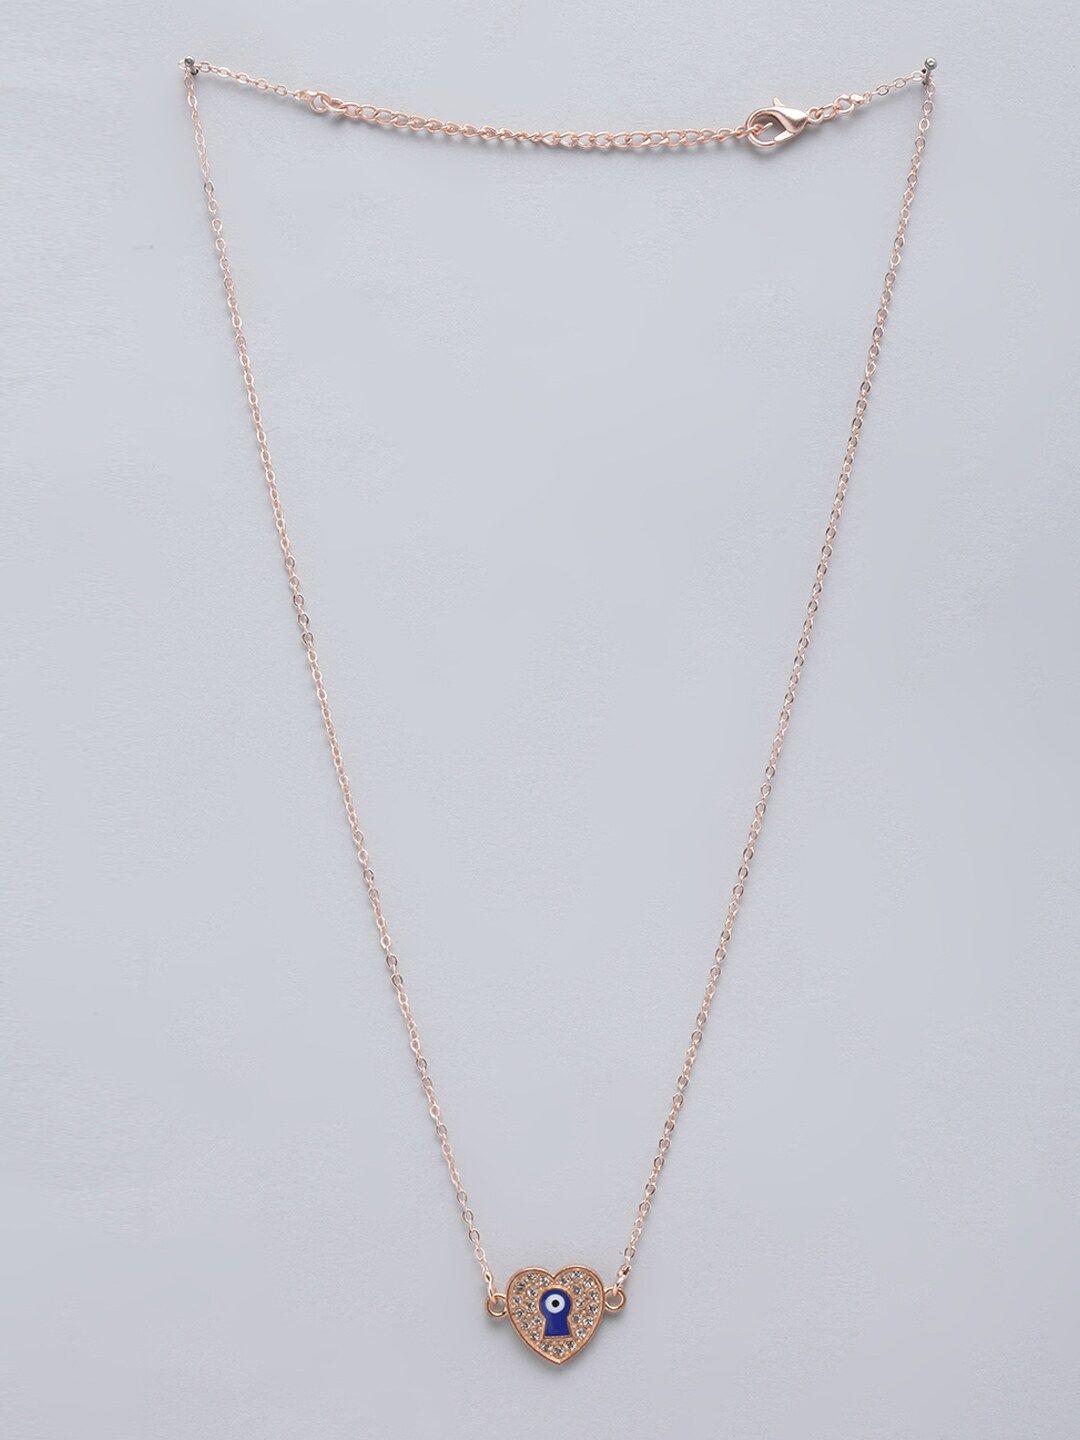 stylecast x kpop rose gold-toned rose gold-plated cz studded enamelled heart shaped chain